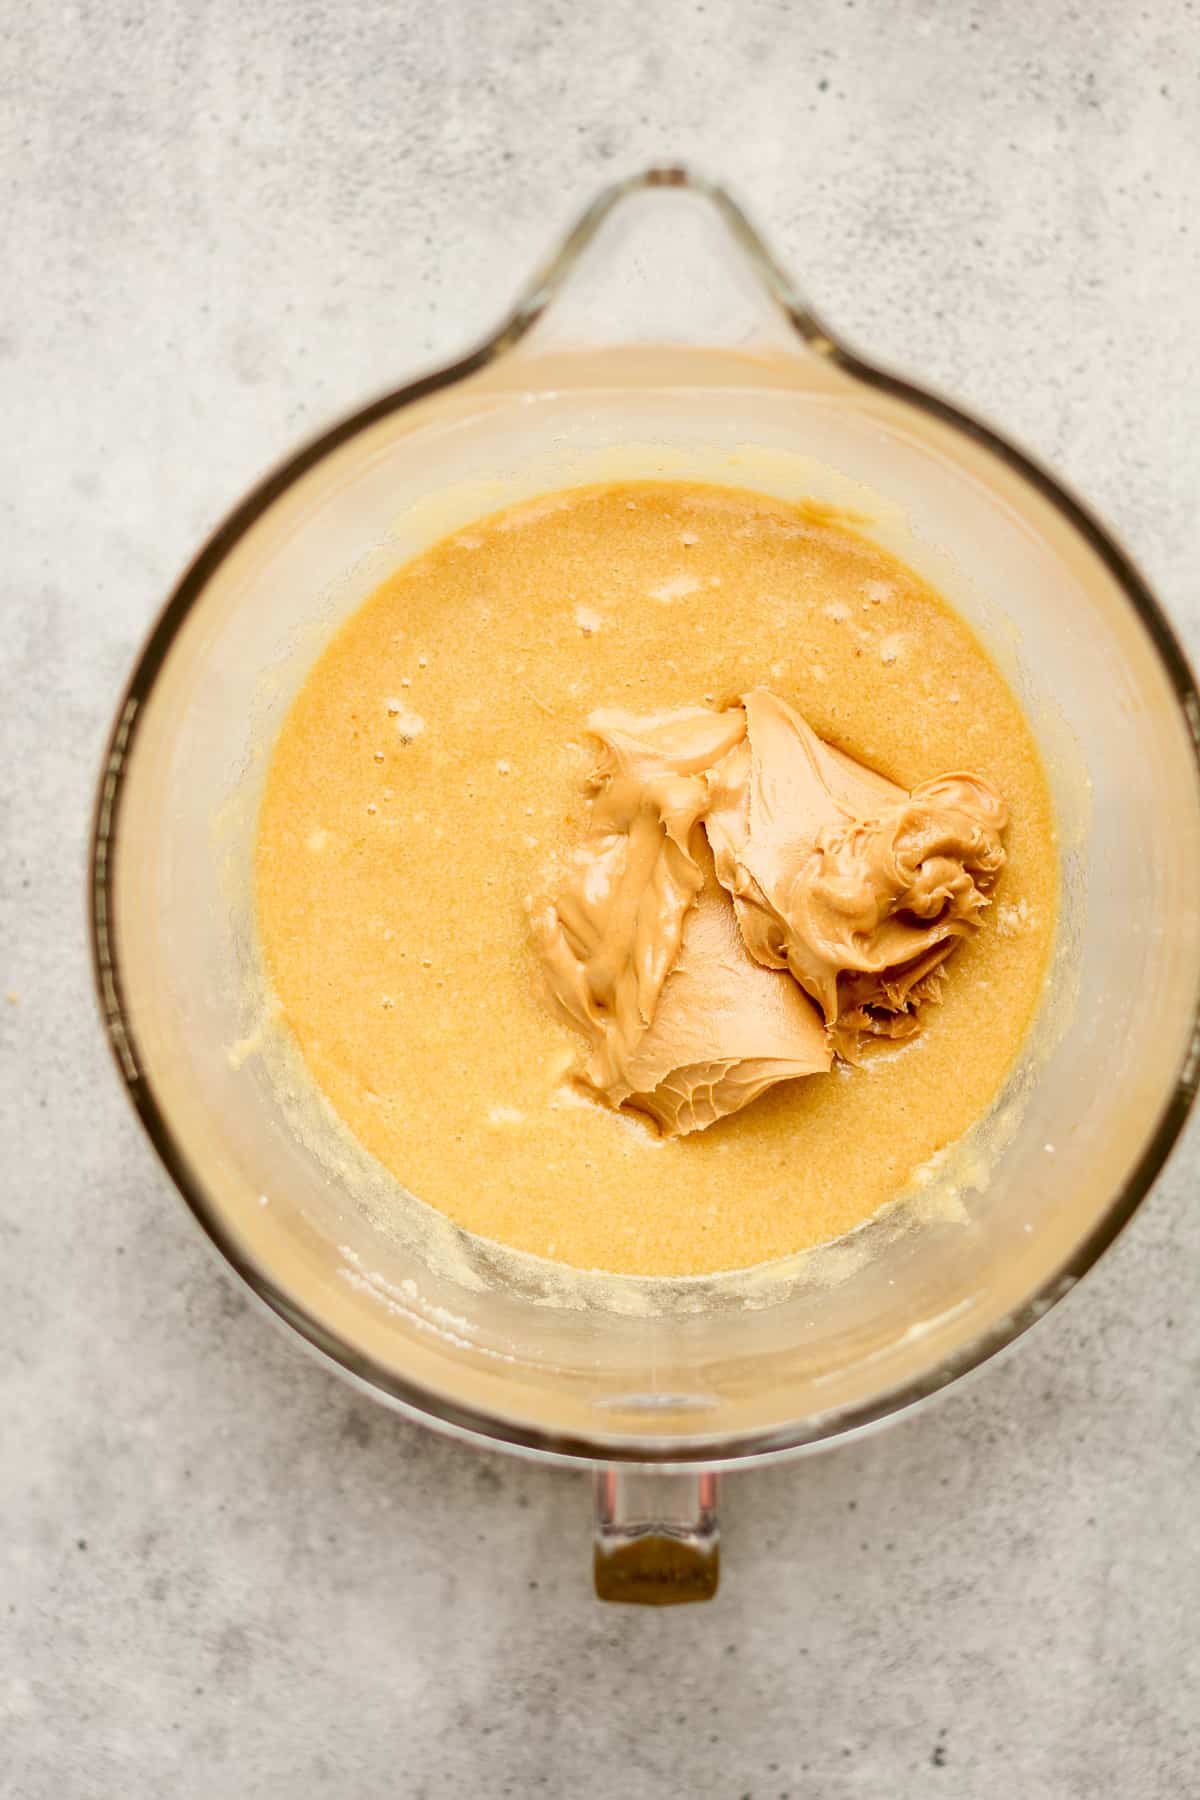 A mixing bowl of the wet ingredients with the peanut butter on top.